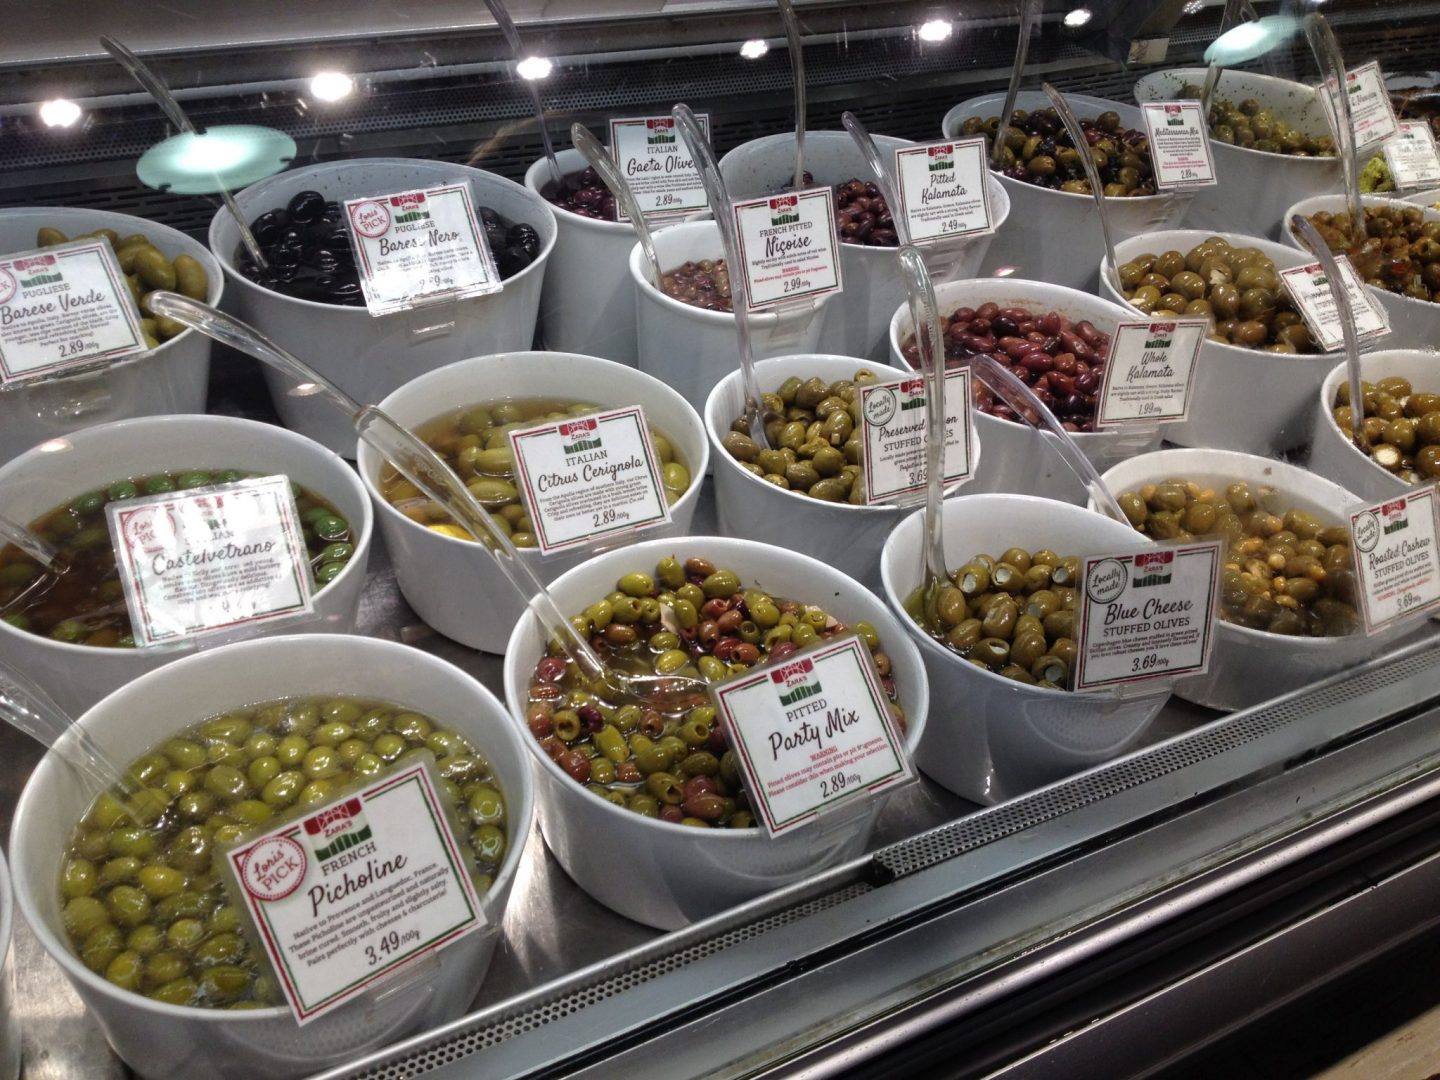 Olives from the Vancouver market